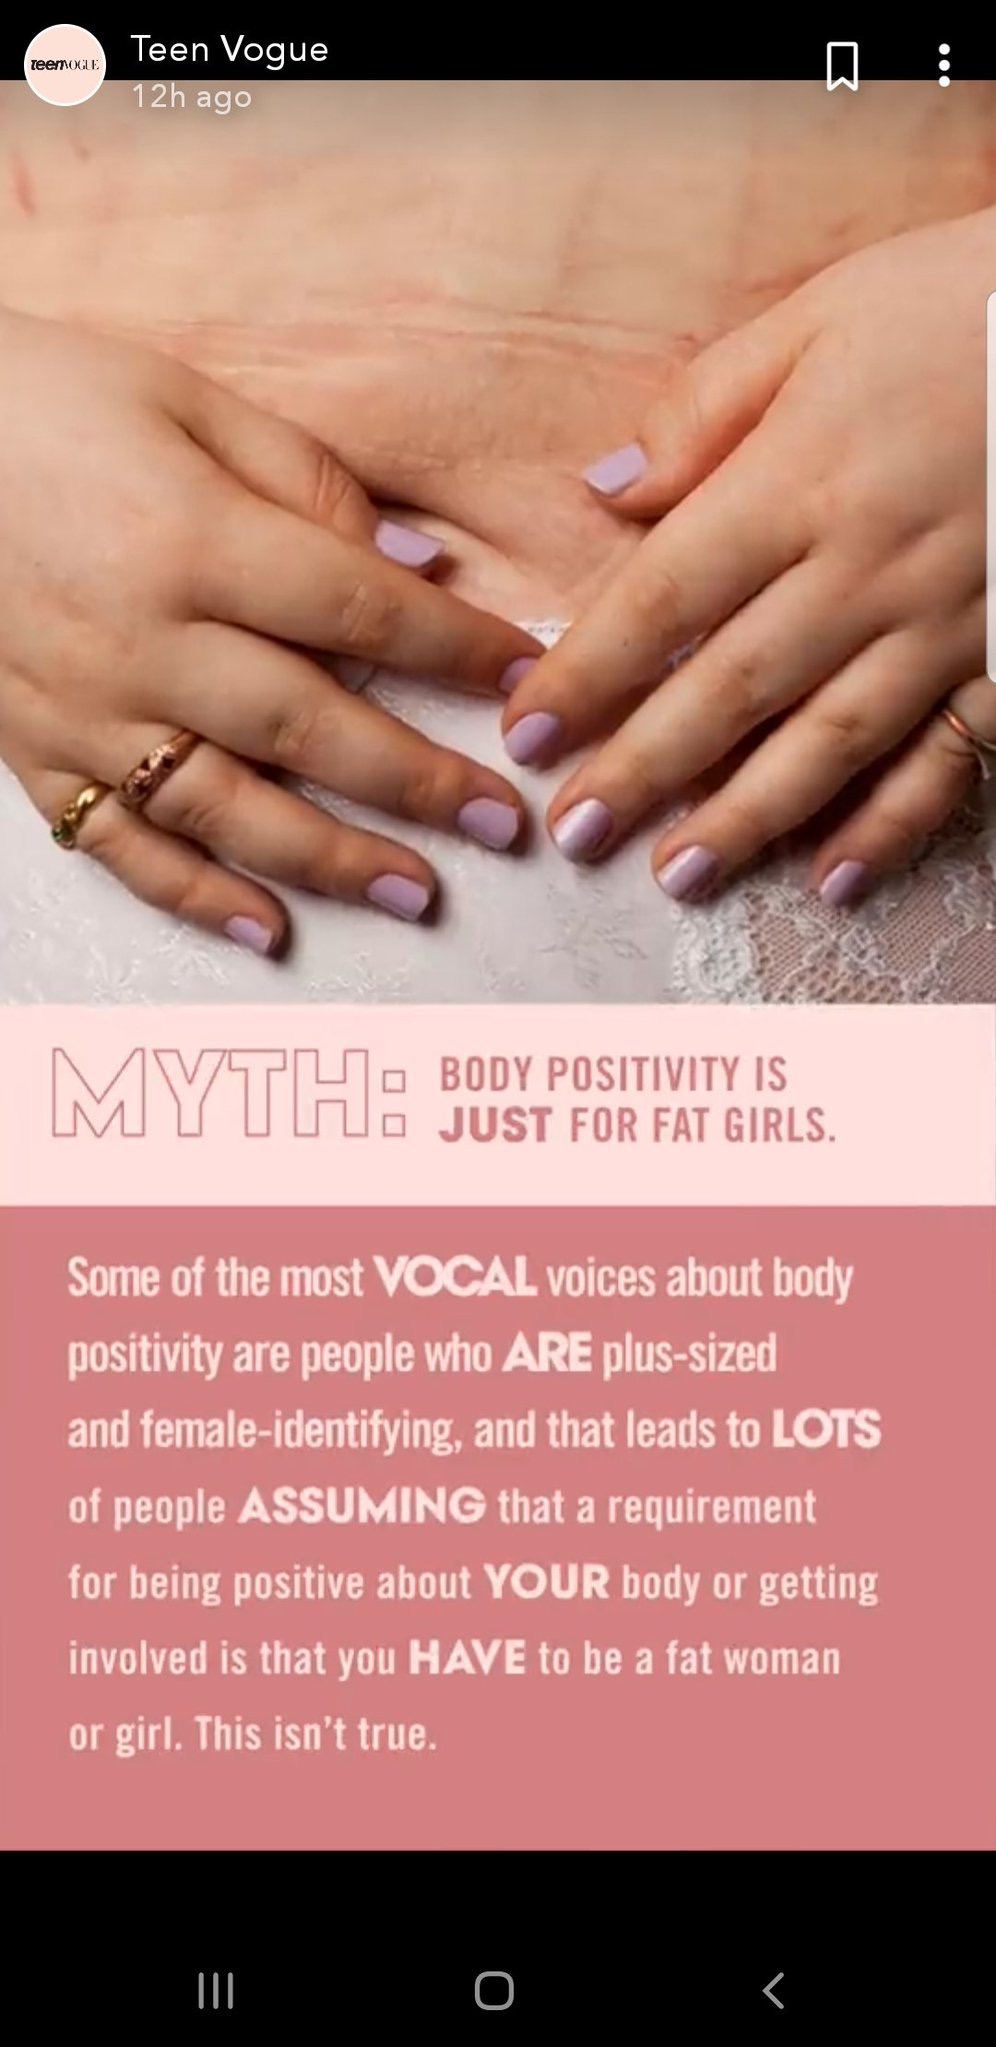 Teen Vogue calls Body Positivity for plus size bodies a myth